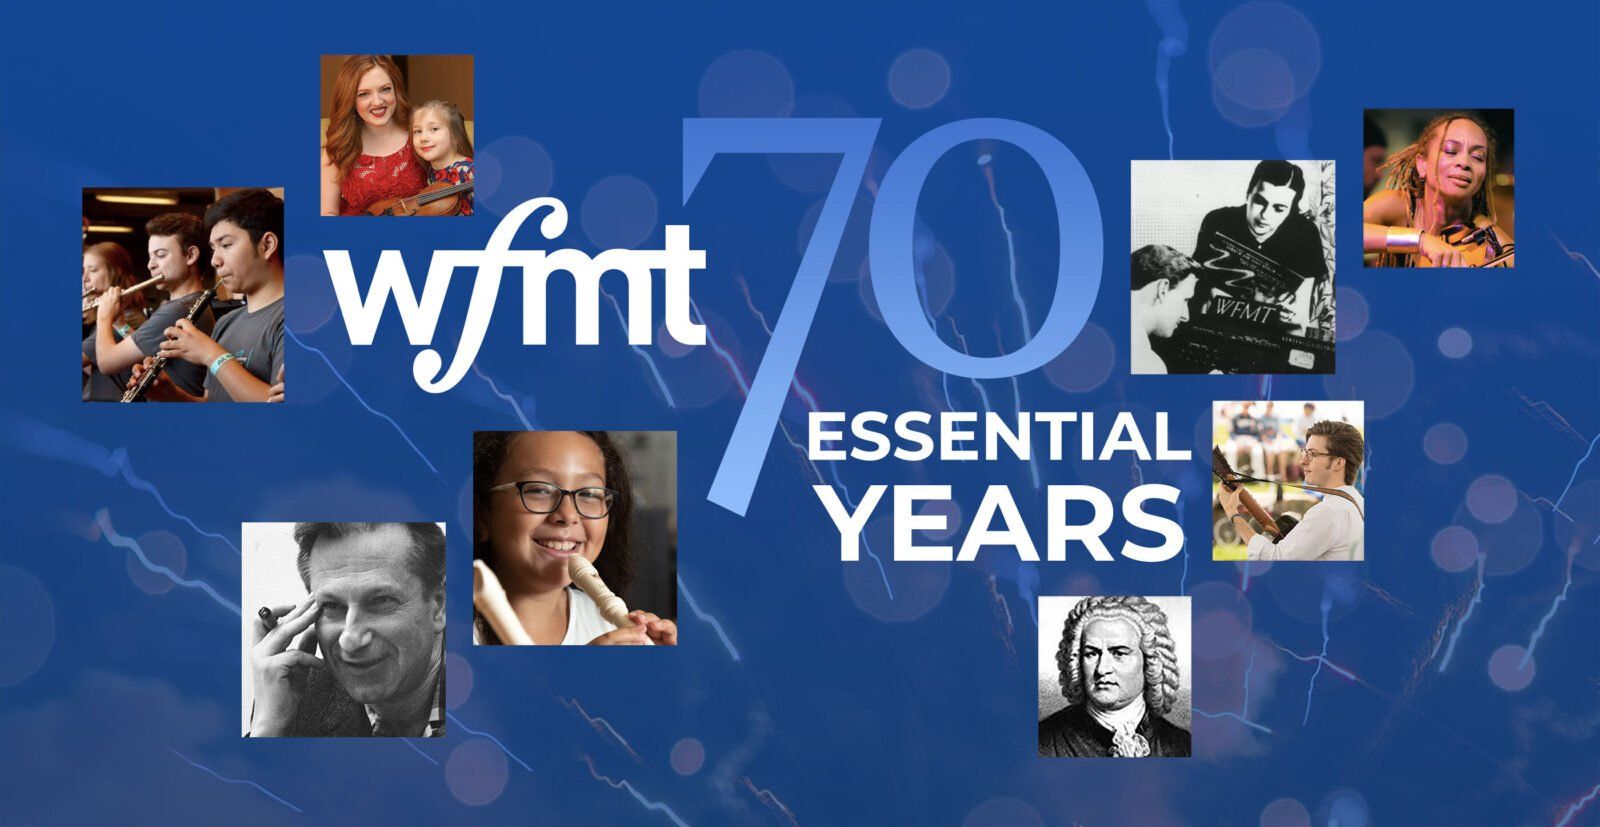 Chicago Tonight  WFMT Celebrates 70 Years On Air with a Day of